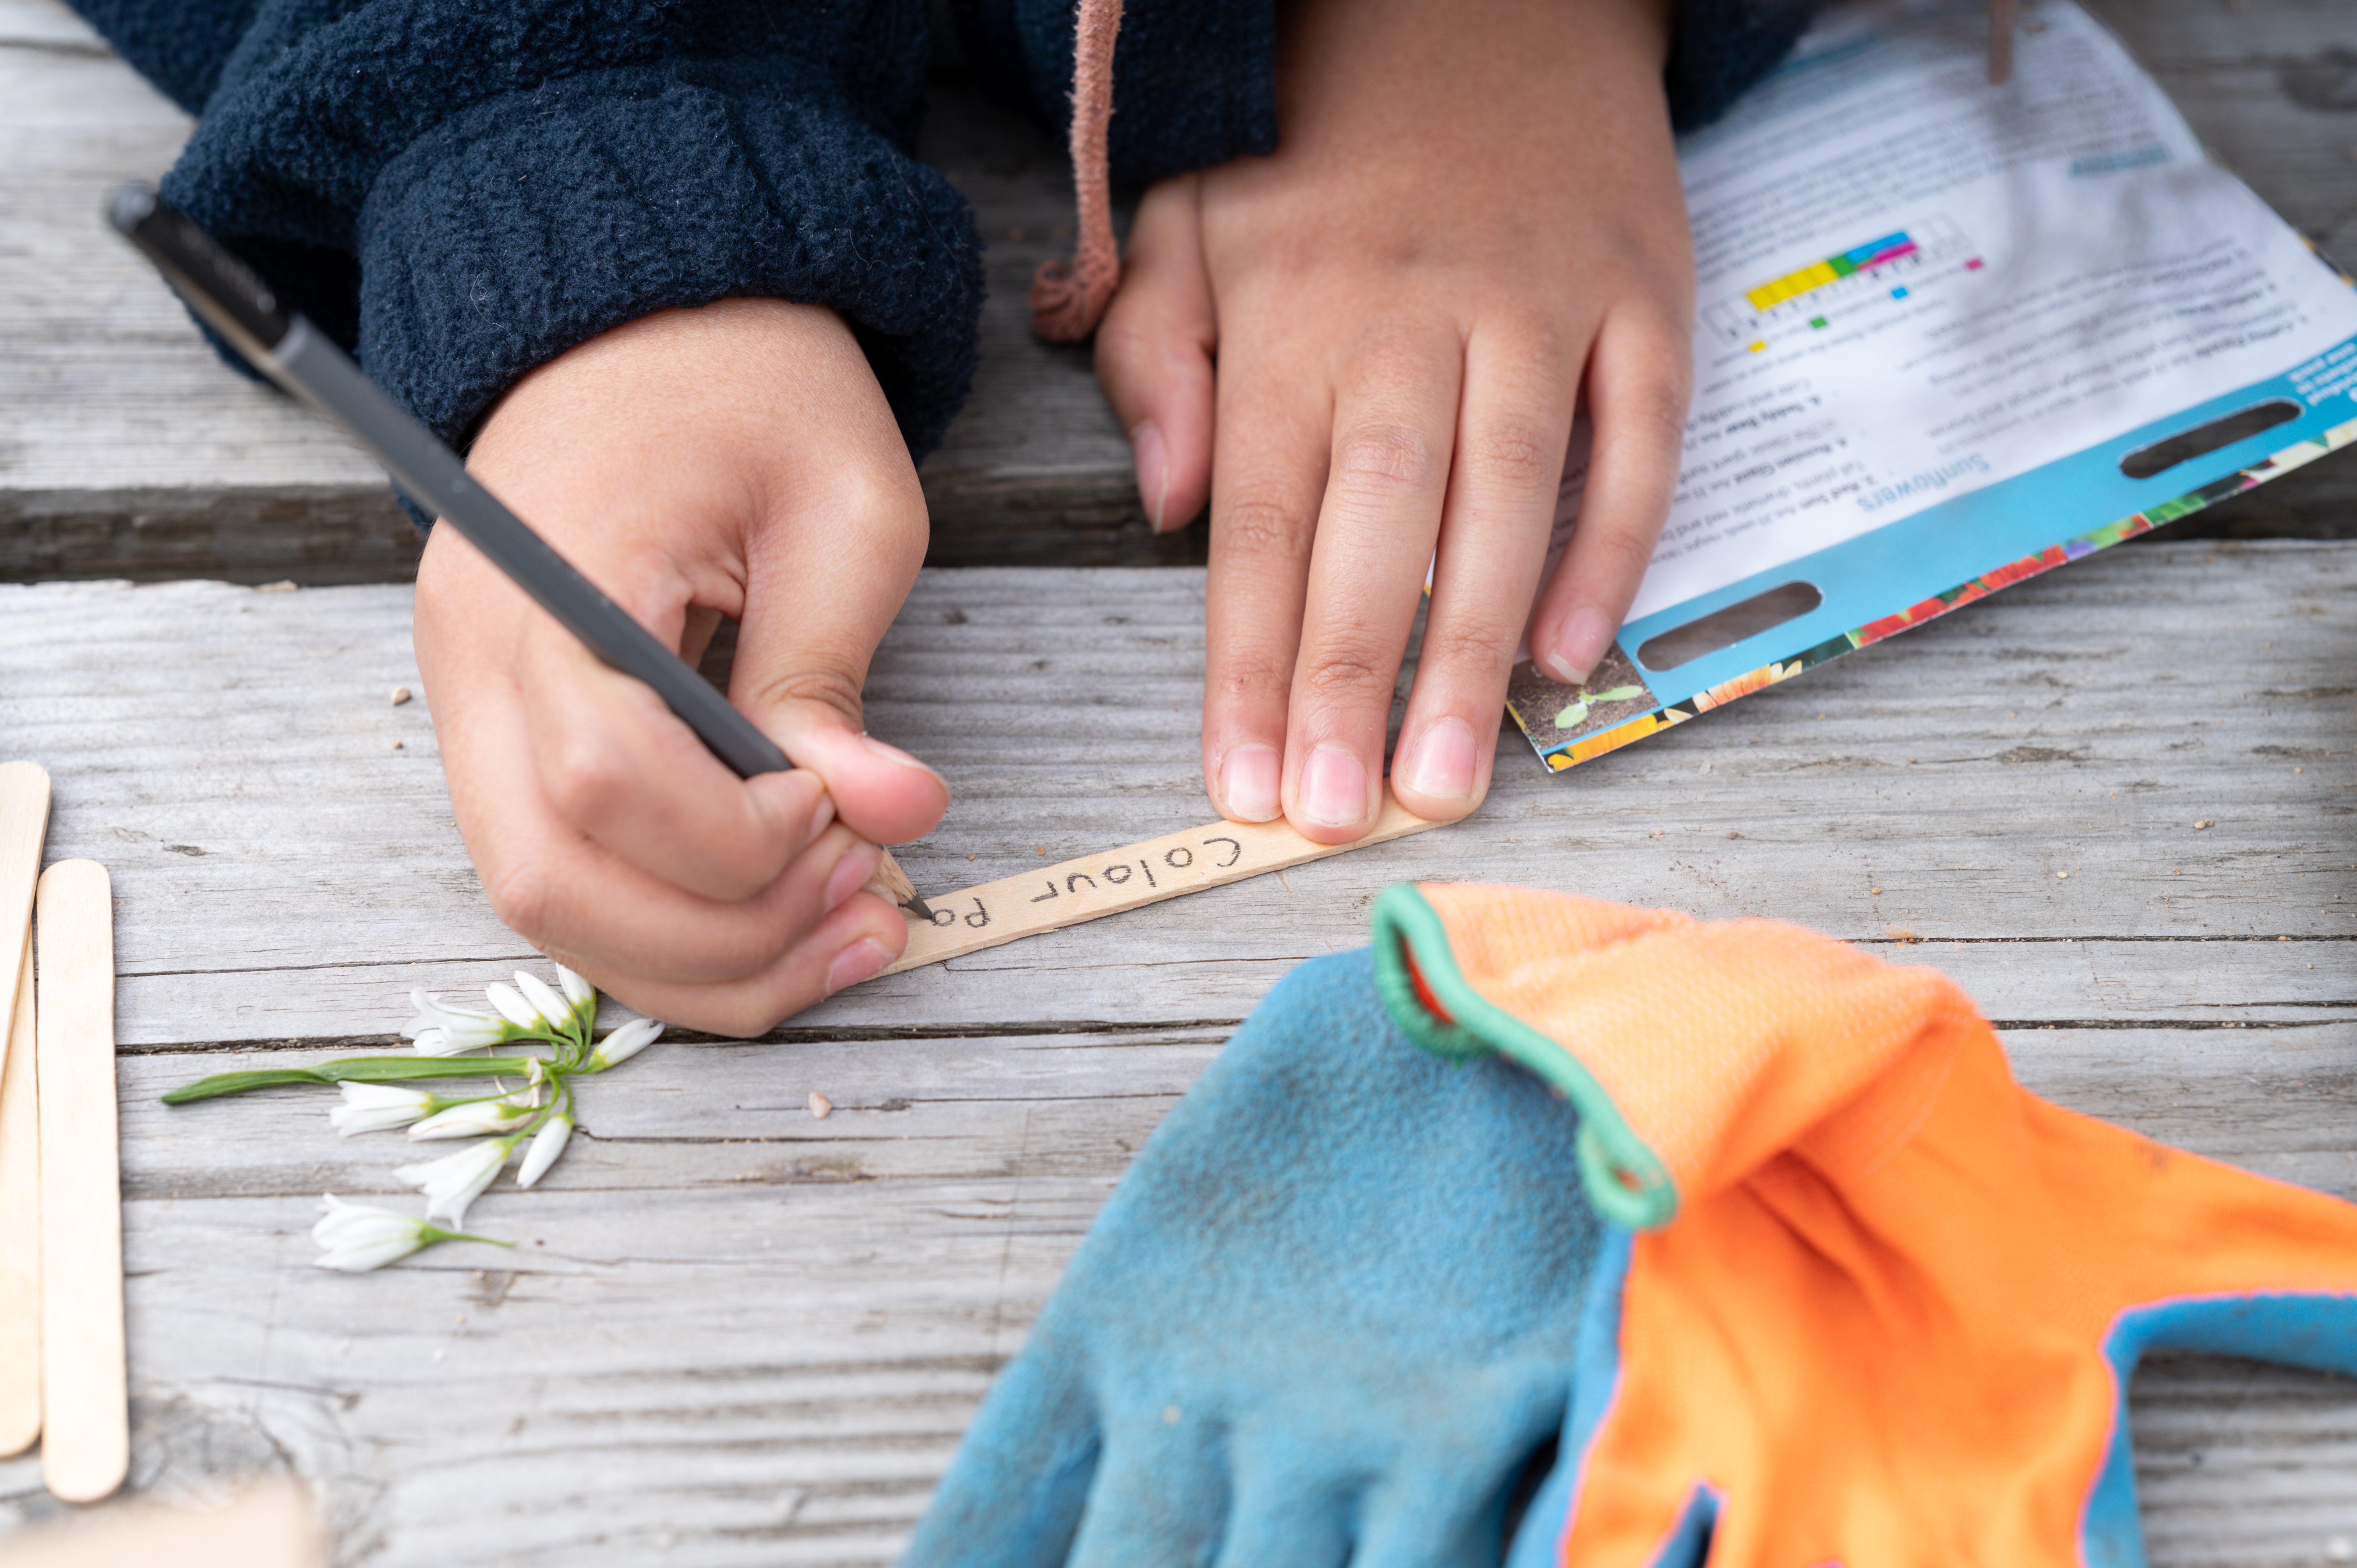 Child writes using pencil on lolly stick the word 'colour' to label a plant